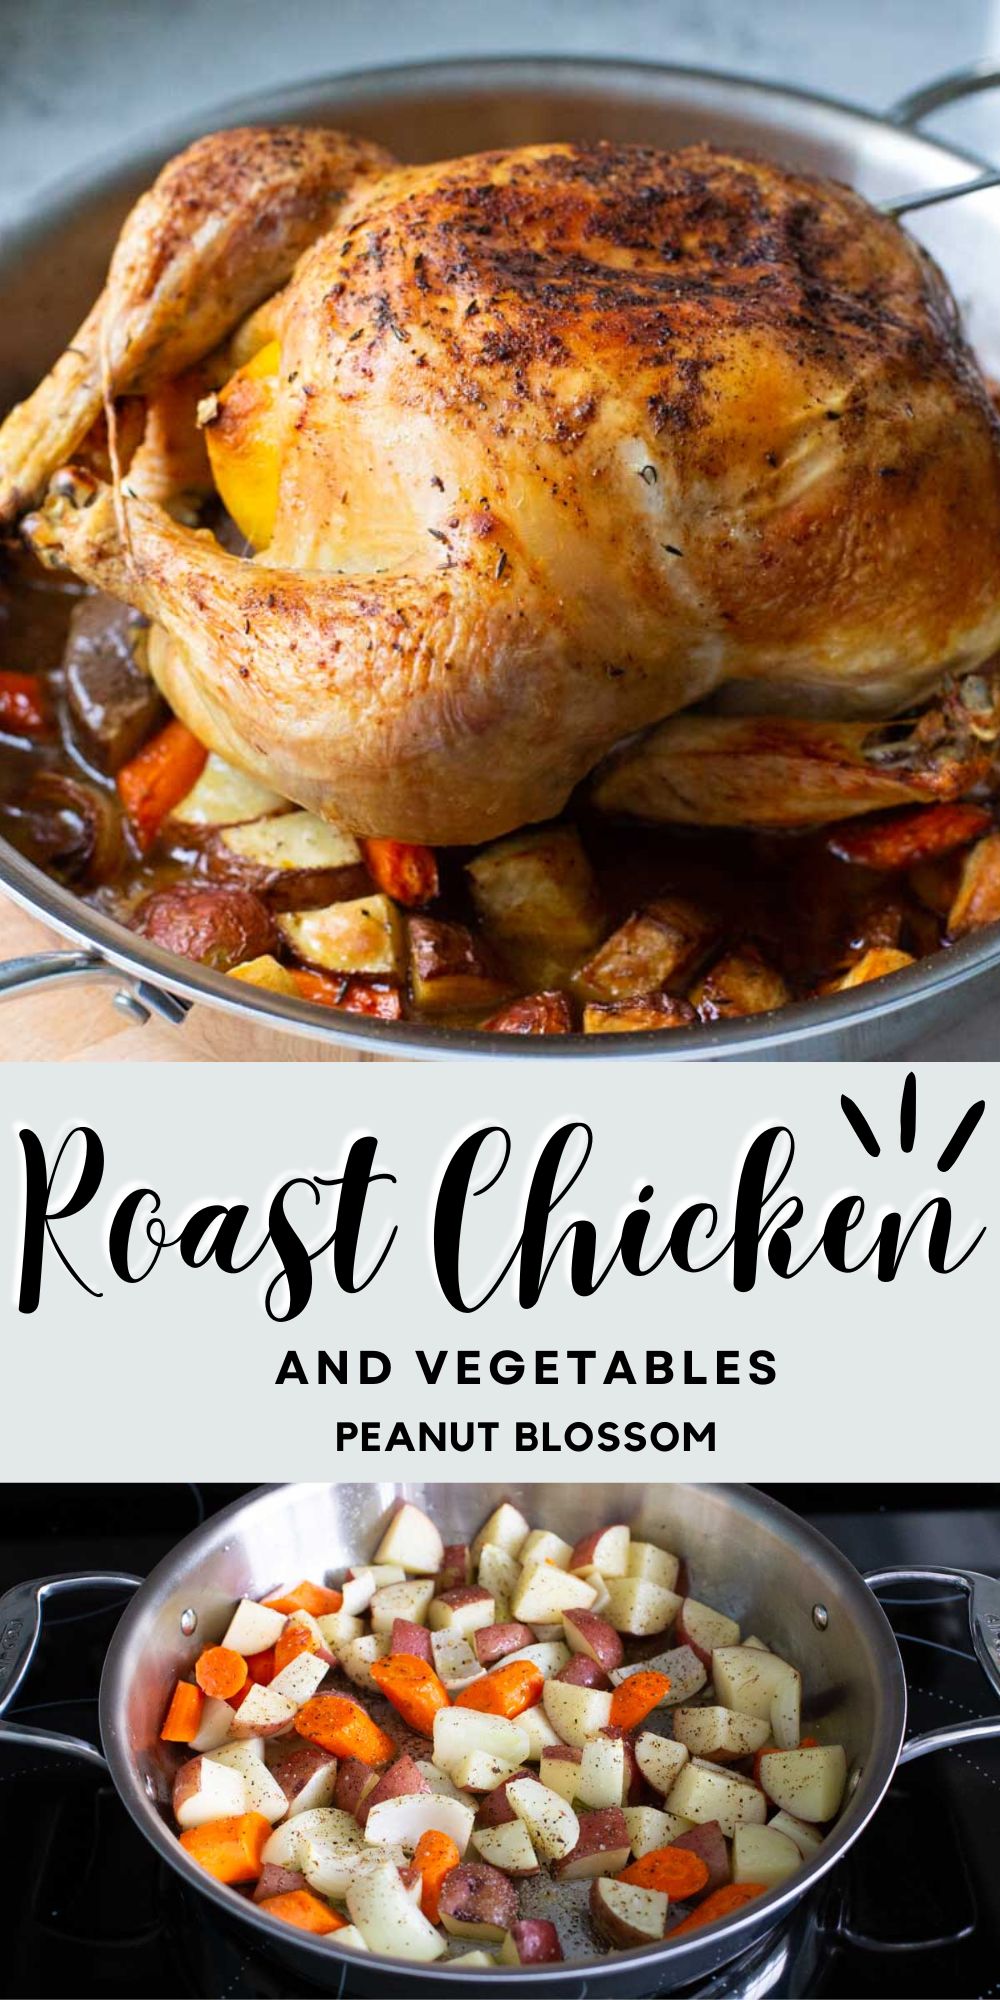 The photo collage shows the roast chicken in a pan with vegetables.